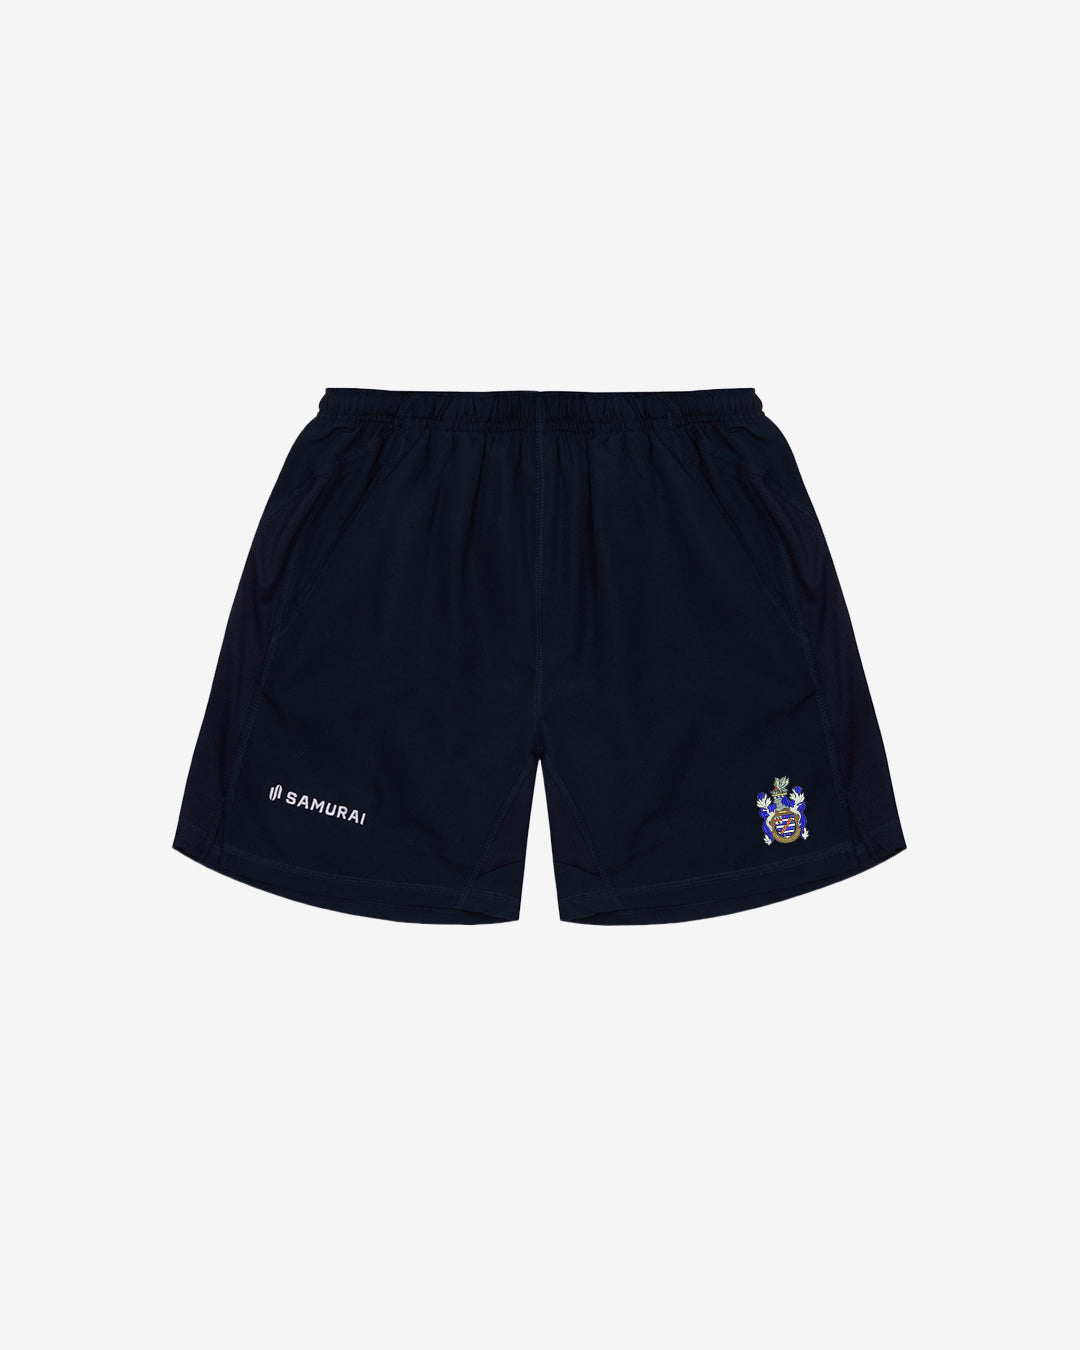 Skegness Rugby Club - EP:0100 - Clipper Short 2.0 - Navy